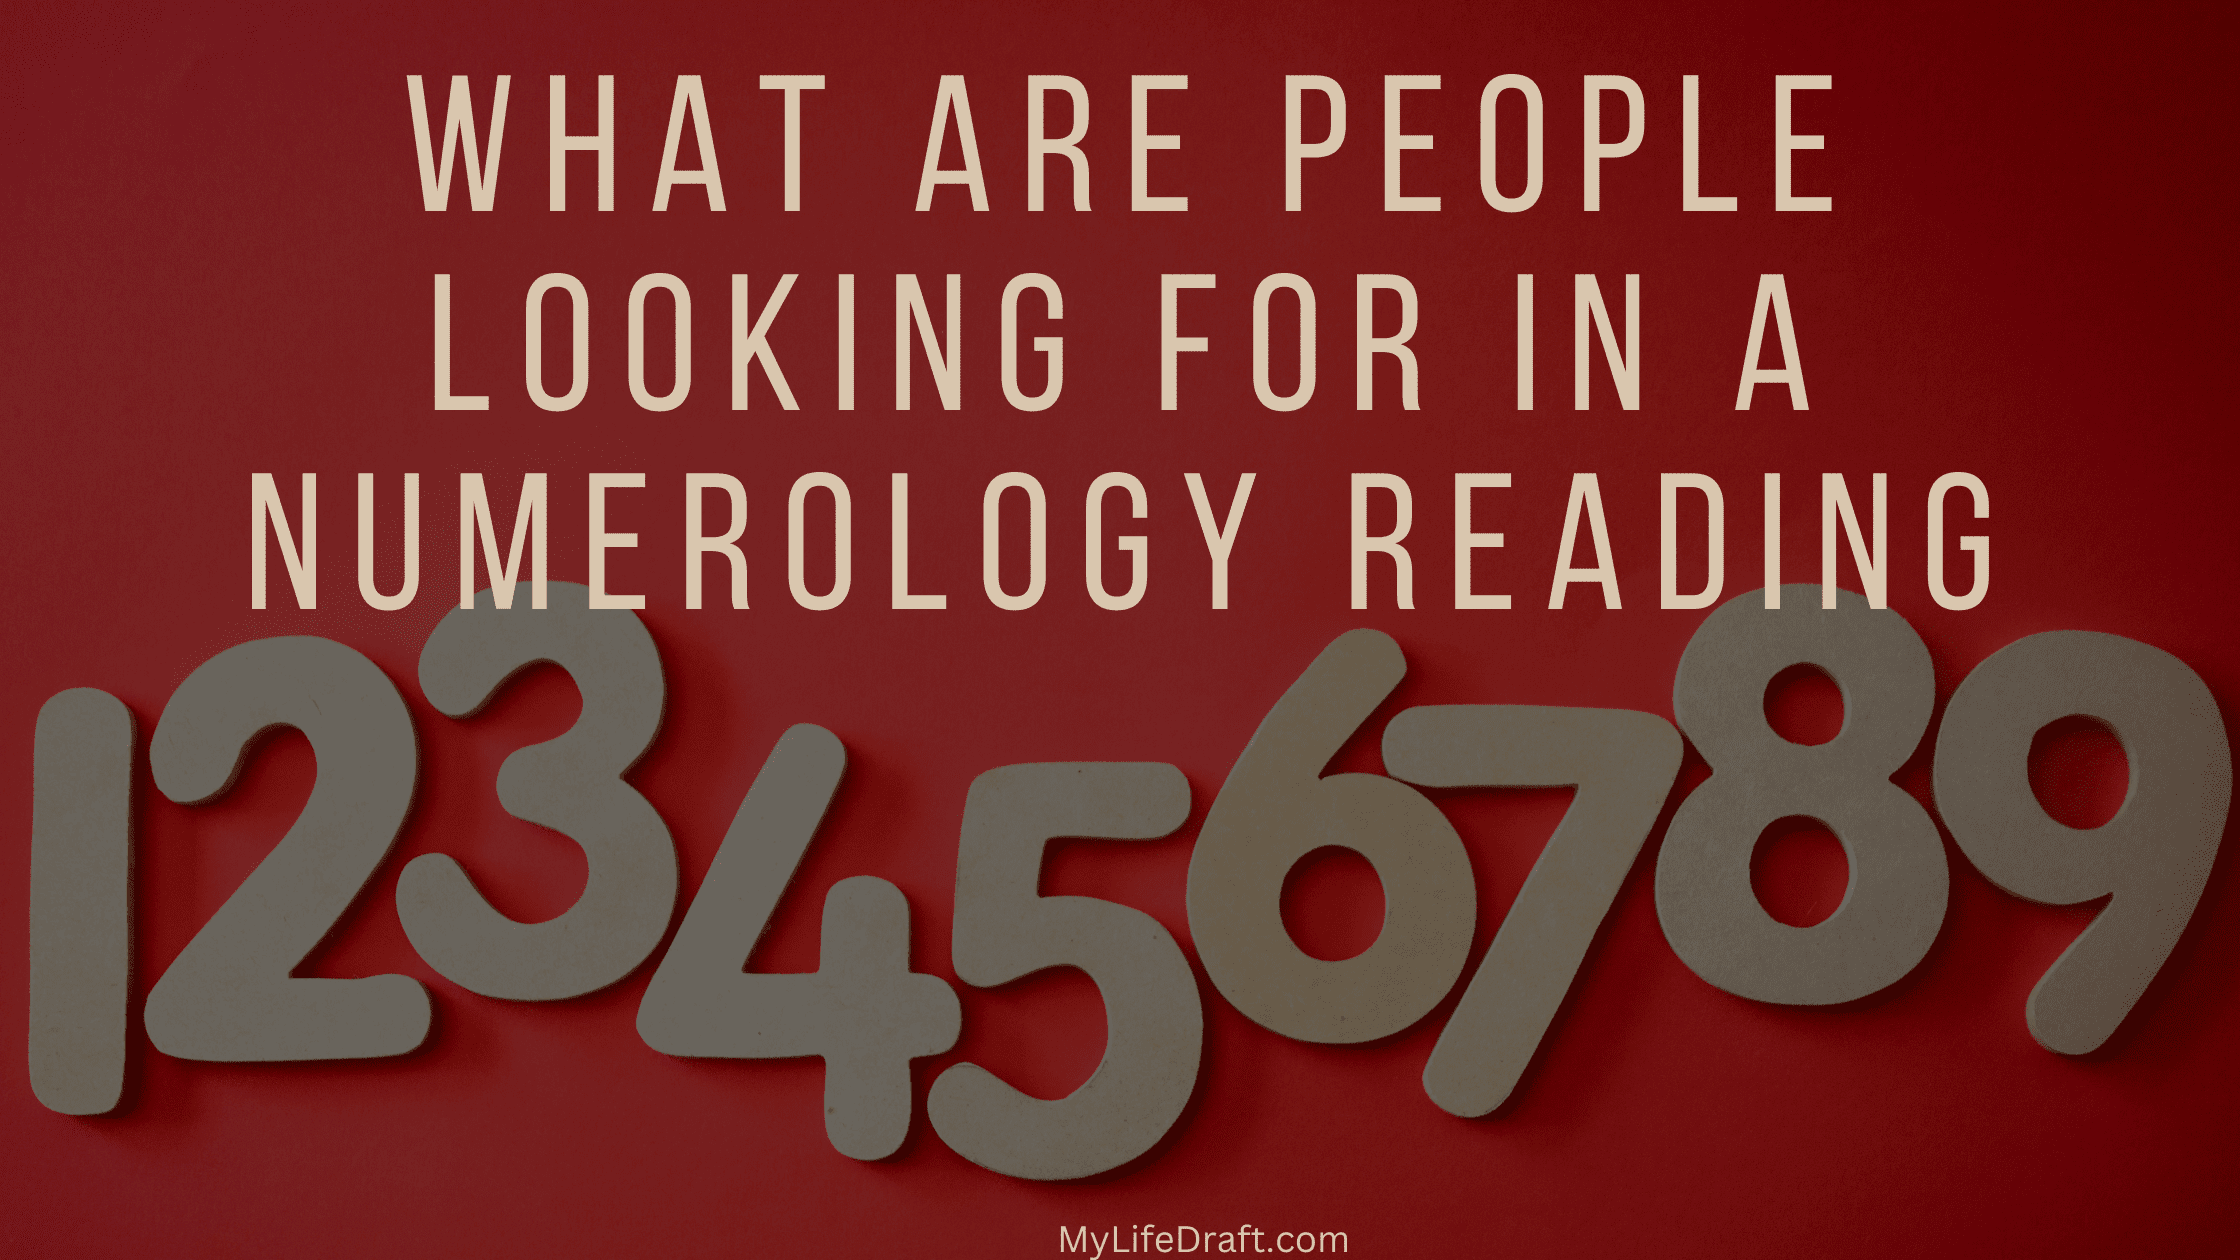 What Are people looking for in a numerology reading